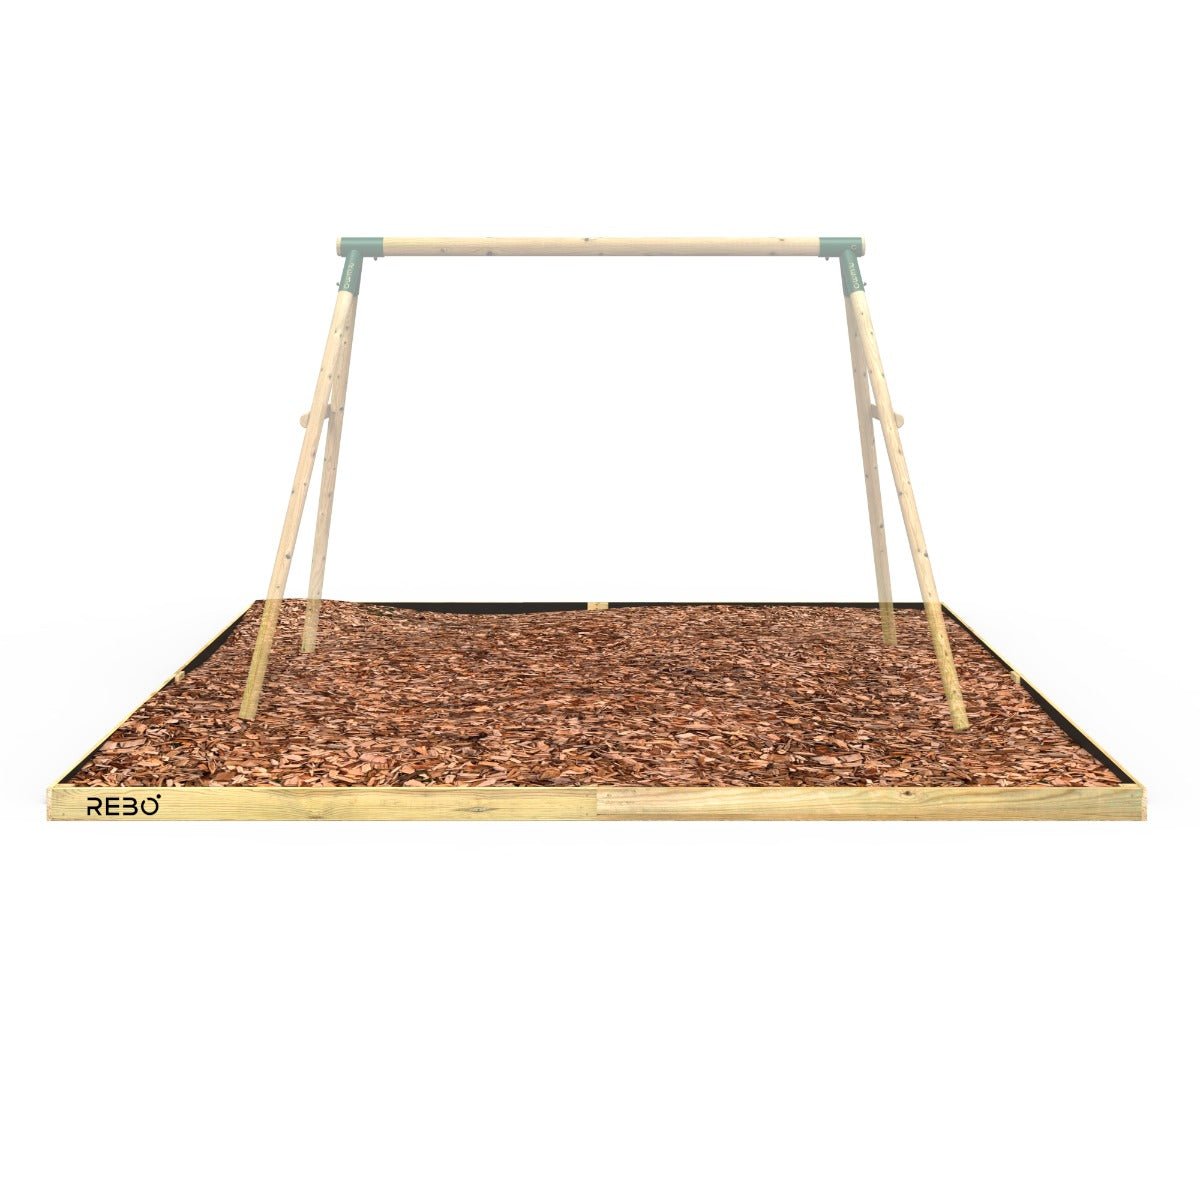 Rebo Safety Play Area Protective Bark Wood Chip Kit - 4M x 4M